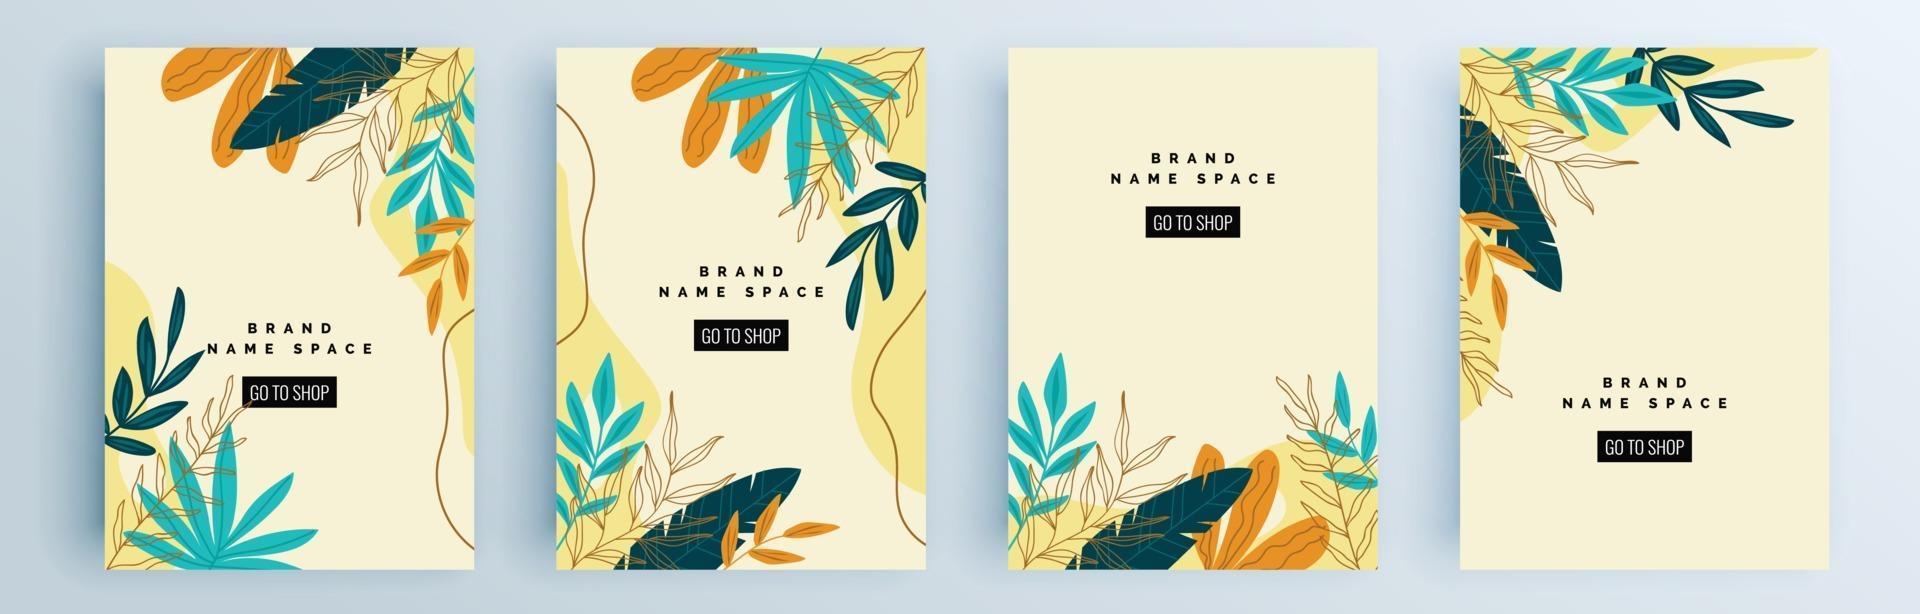 Modern abstract covers set, minimal covers design, colorful geometric vector